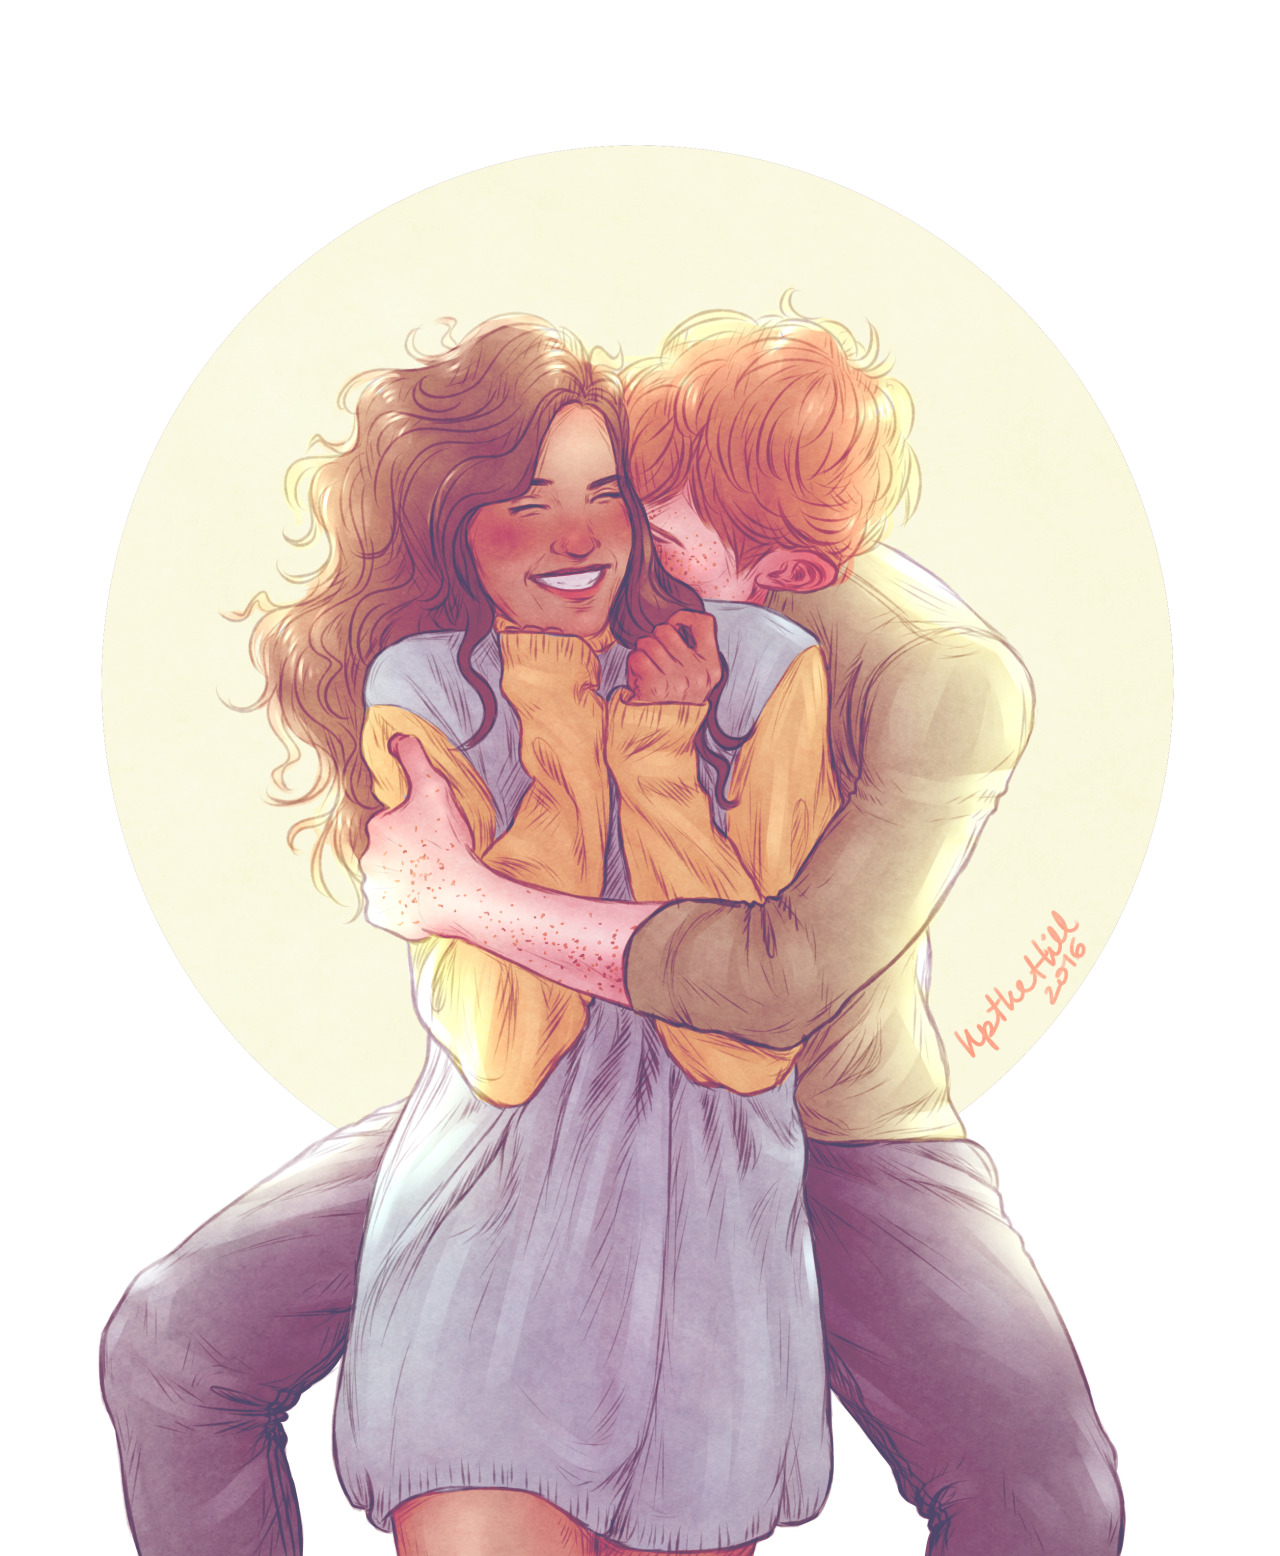 Ron and hermione fanfiction m